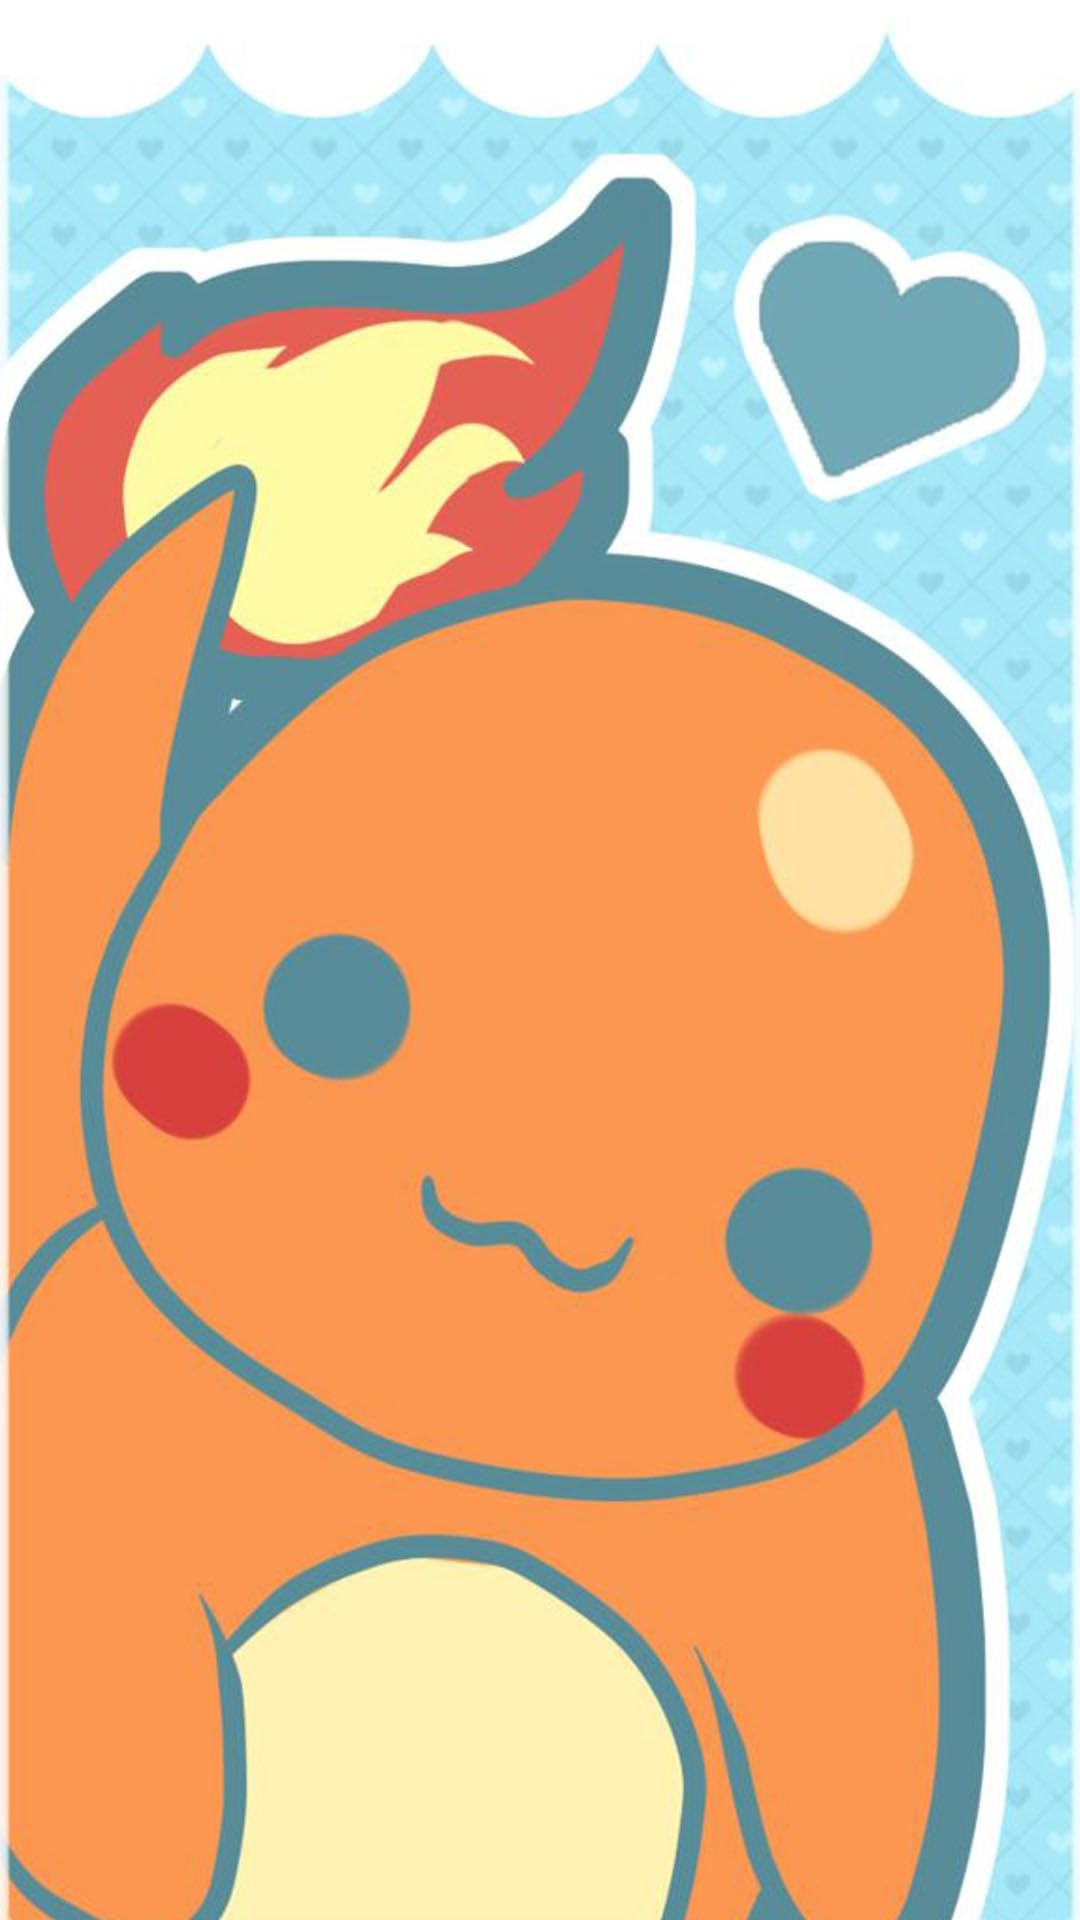 1080x1920 This Charmander wallpaper is so cute, it's easy to forget that he's a  fire-breathing dragon!